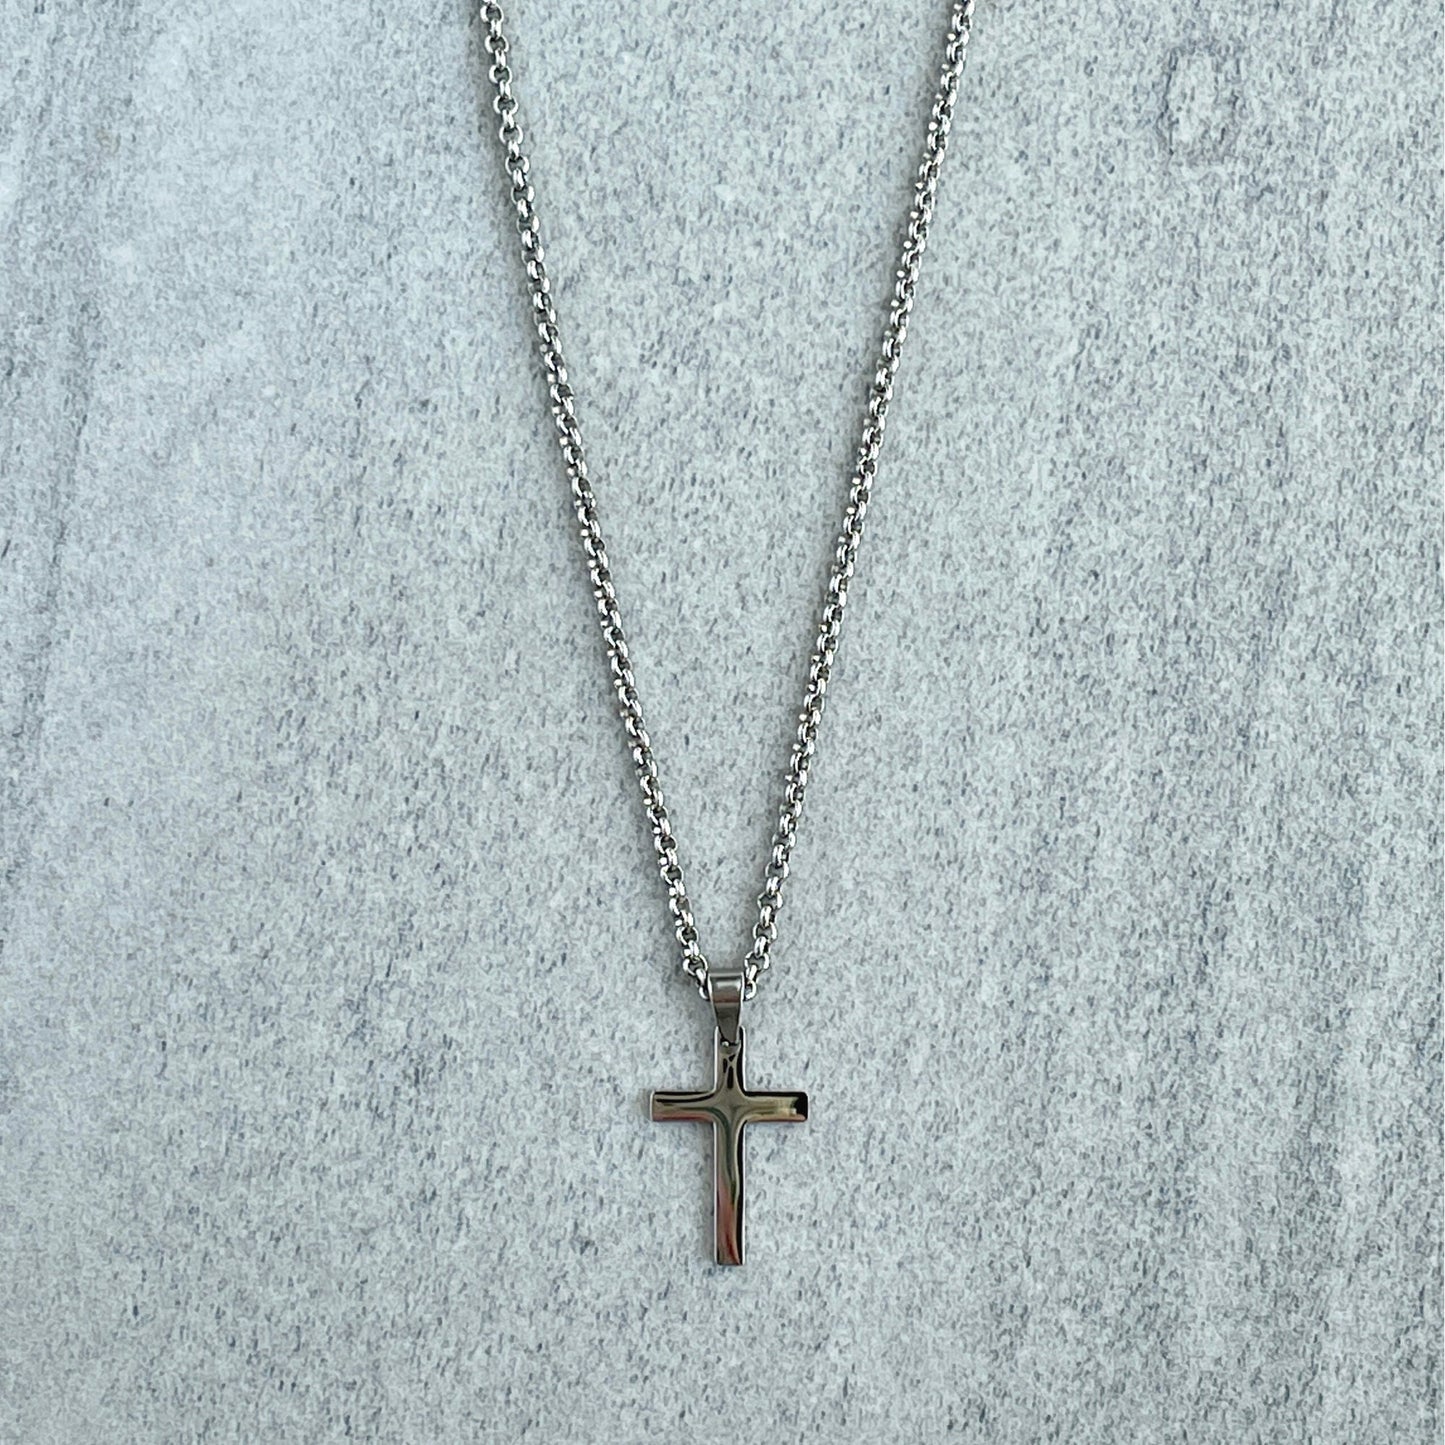 Stainless Steel Cross Necklace for Men